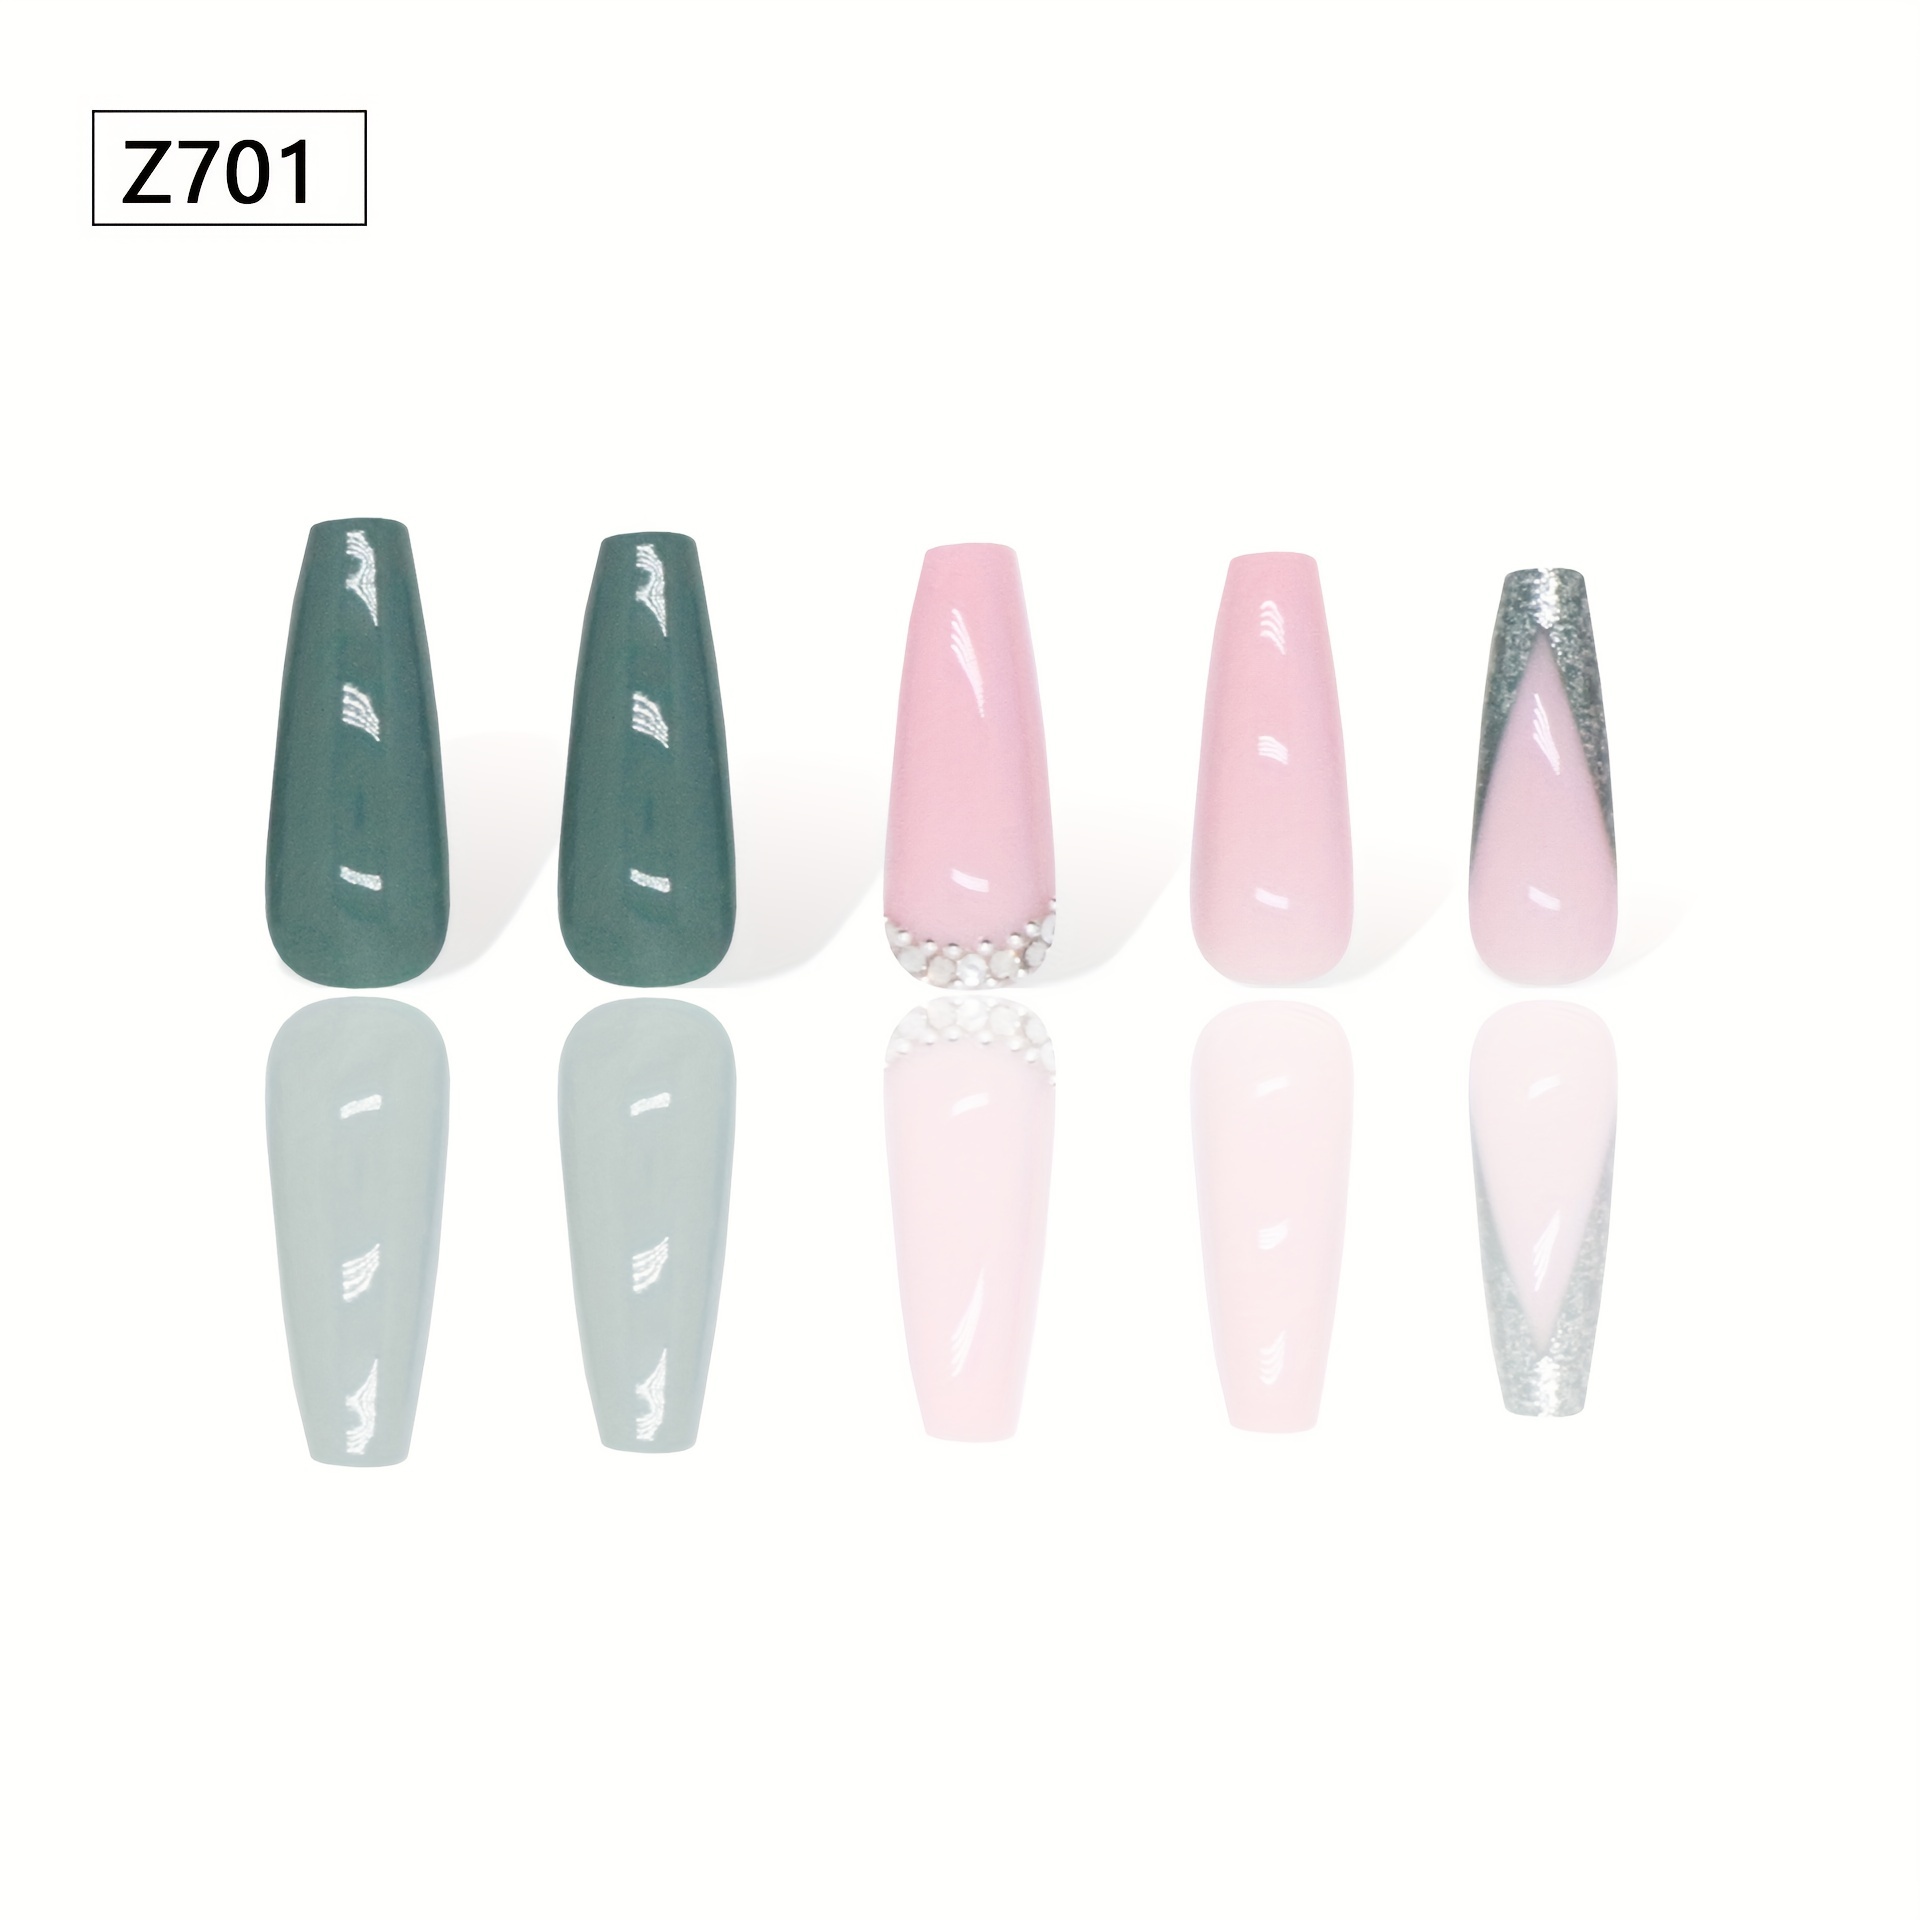 Glitter French Tip Nails Mint Green Ombre Press Nails - Temu Canada